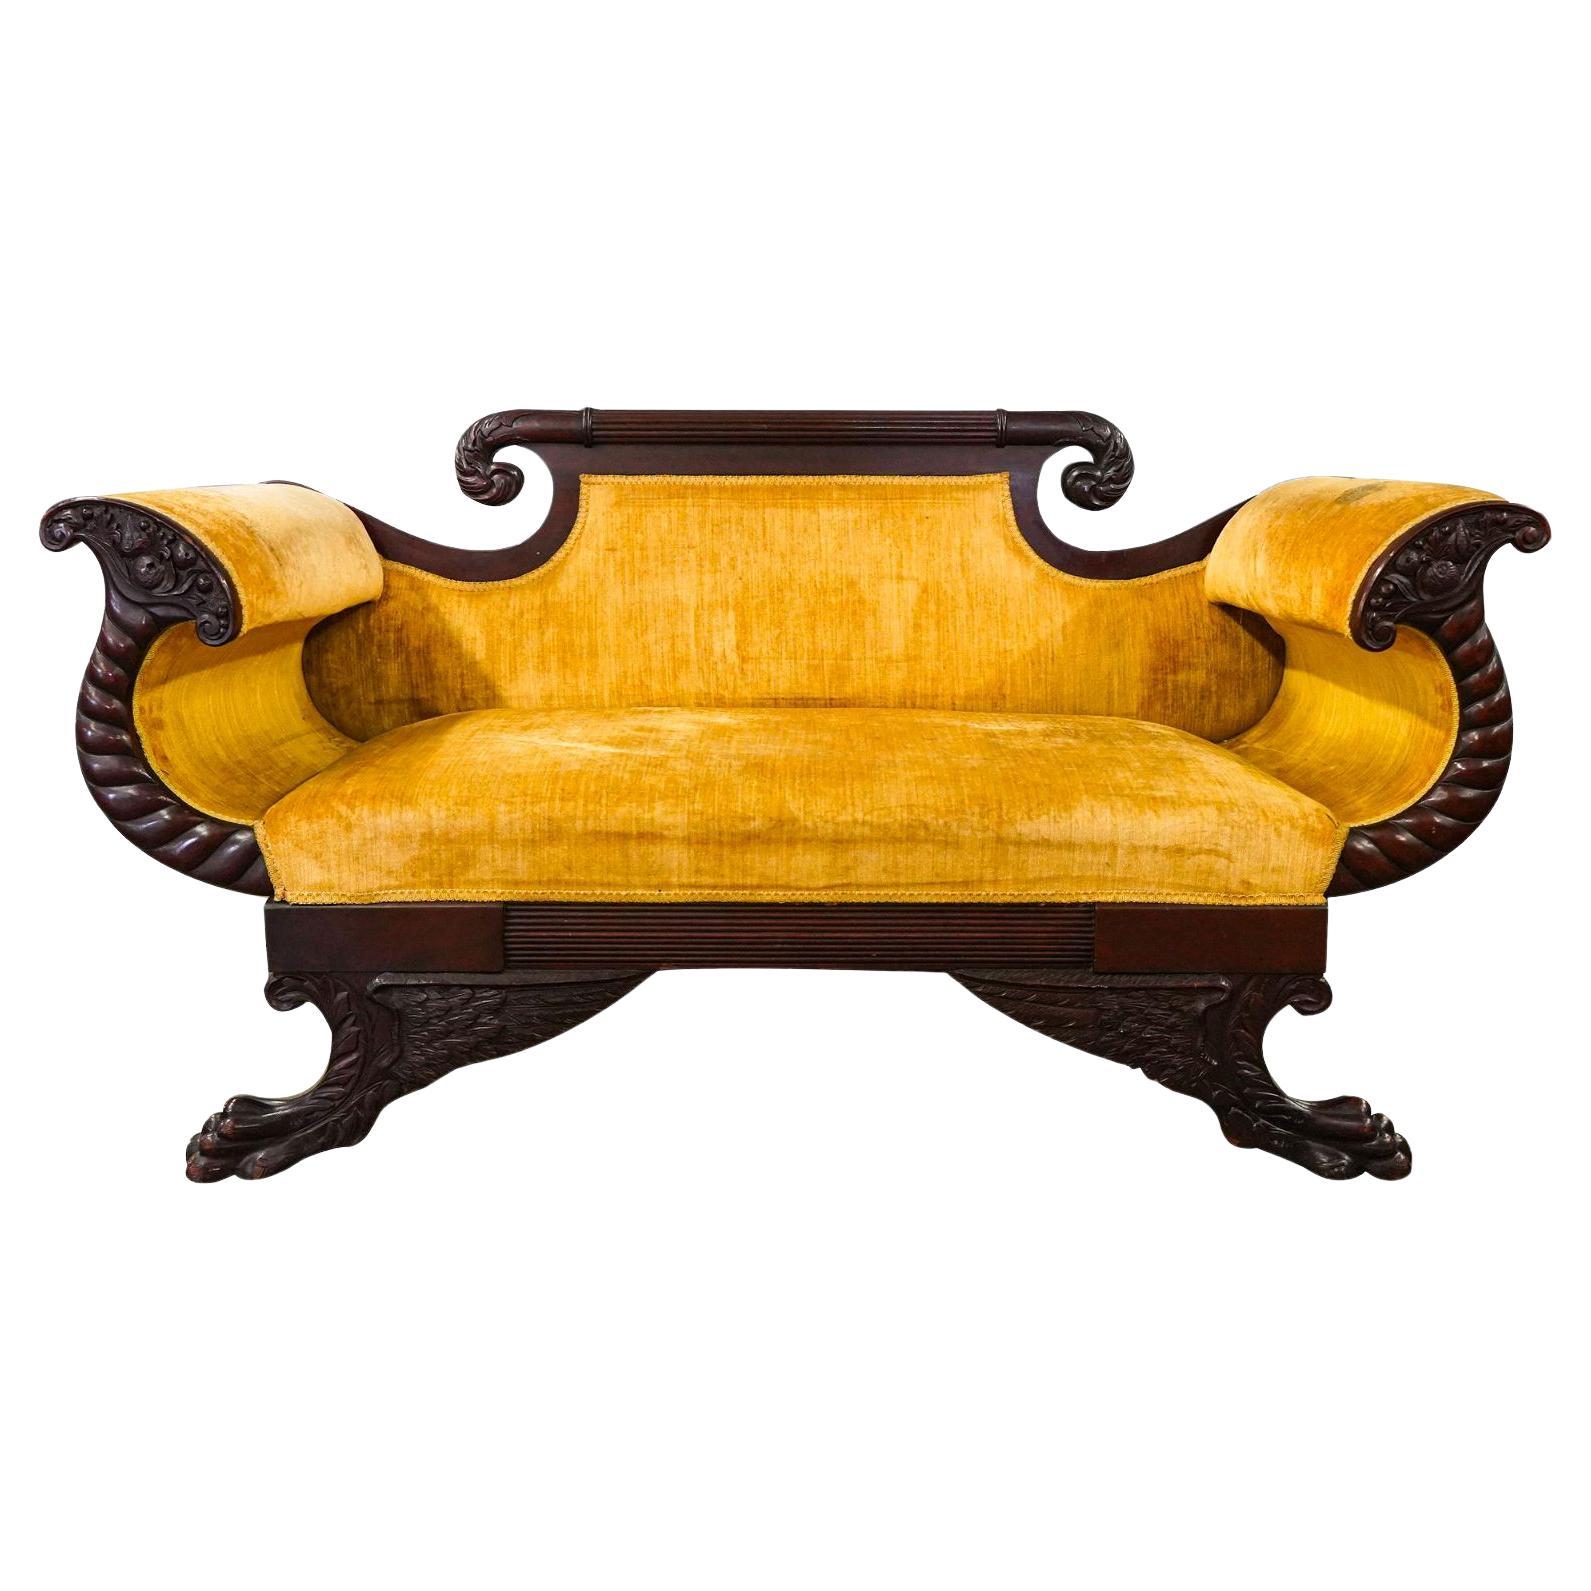 Antique Period American Federal Highly Carved Mahogany Sofa Circa 1800 For Sale